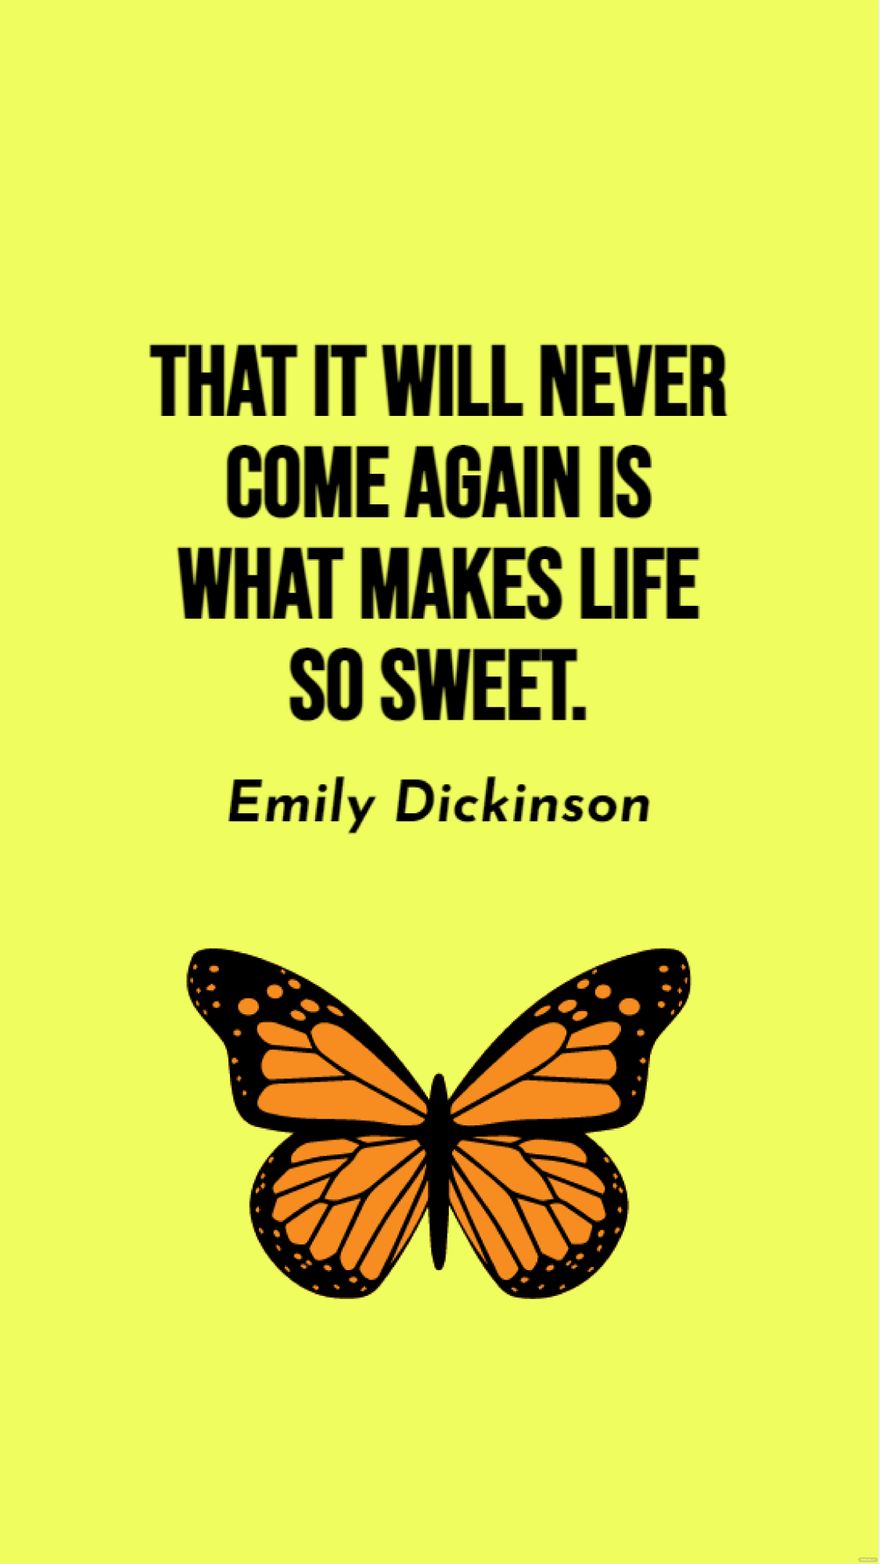 Emily Dickinson - That it will never come again is what makes life so sweet.